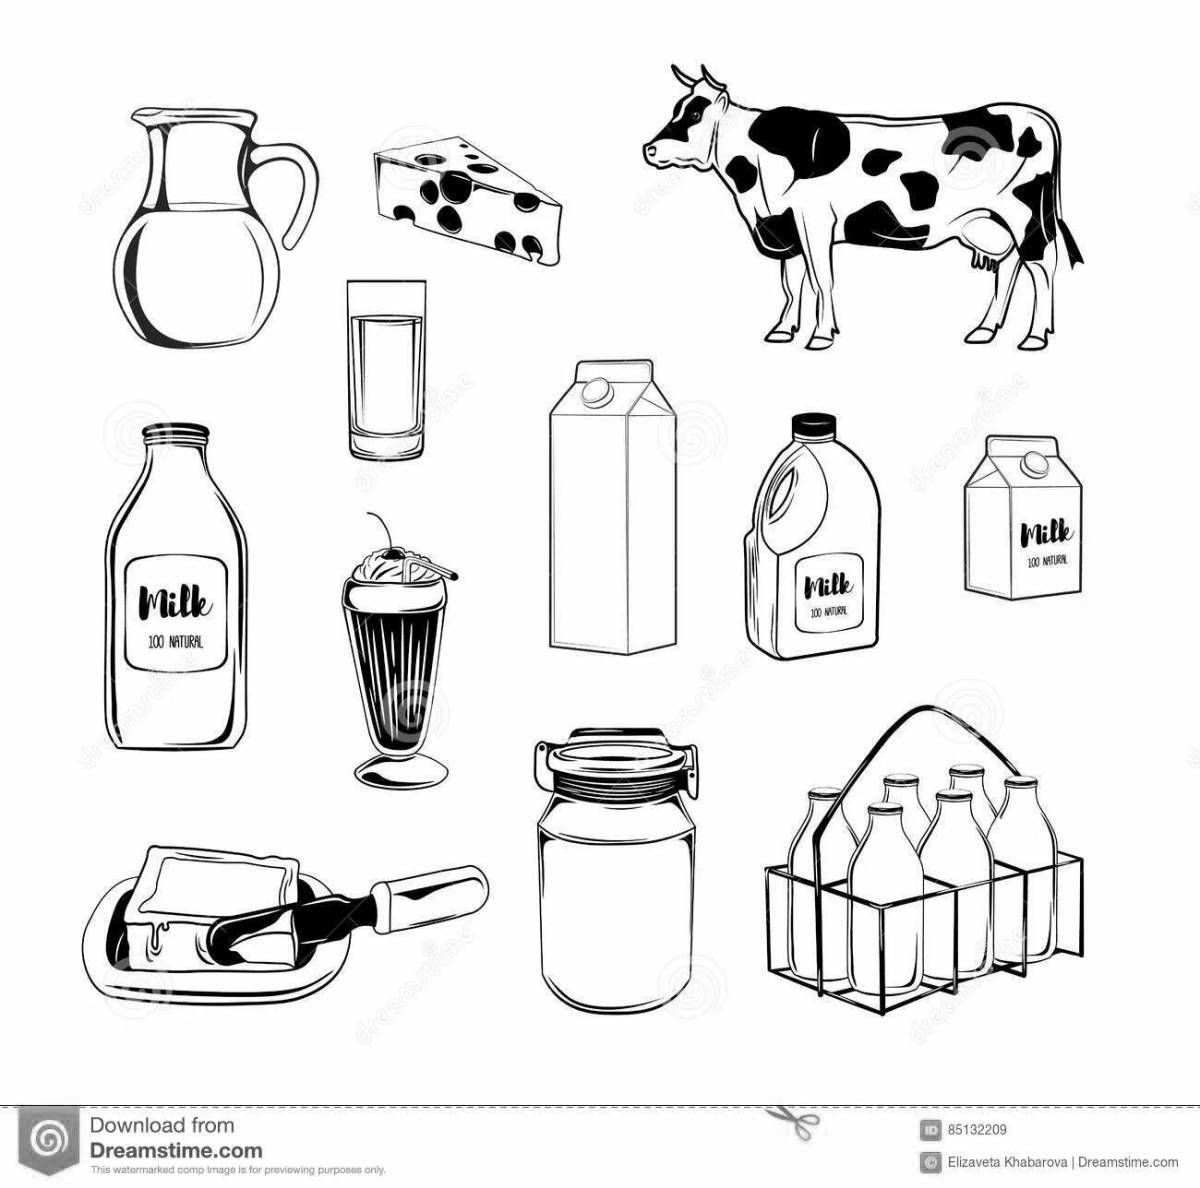 Dairy products for children #3